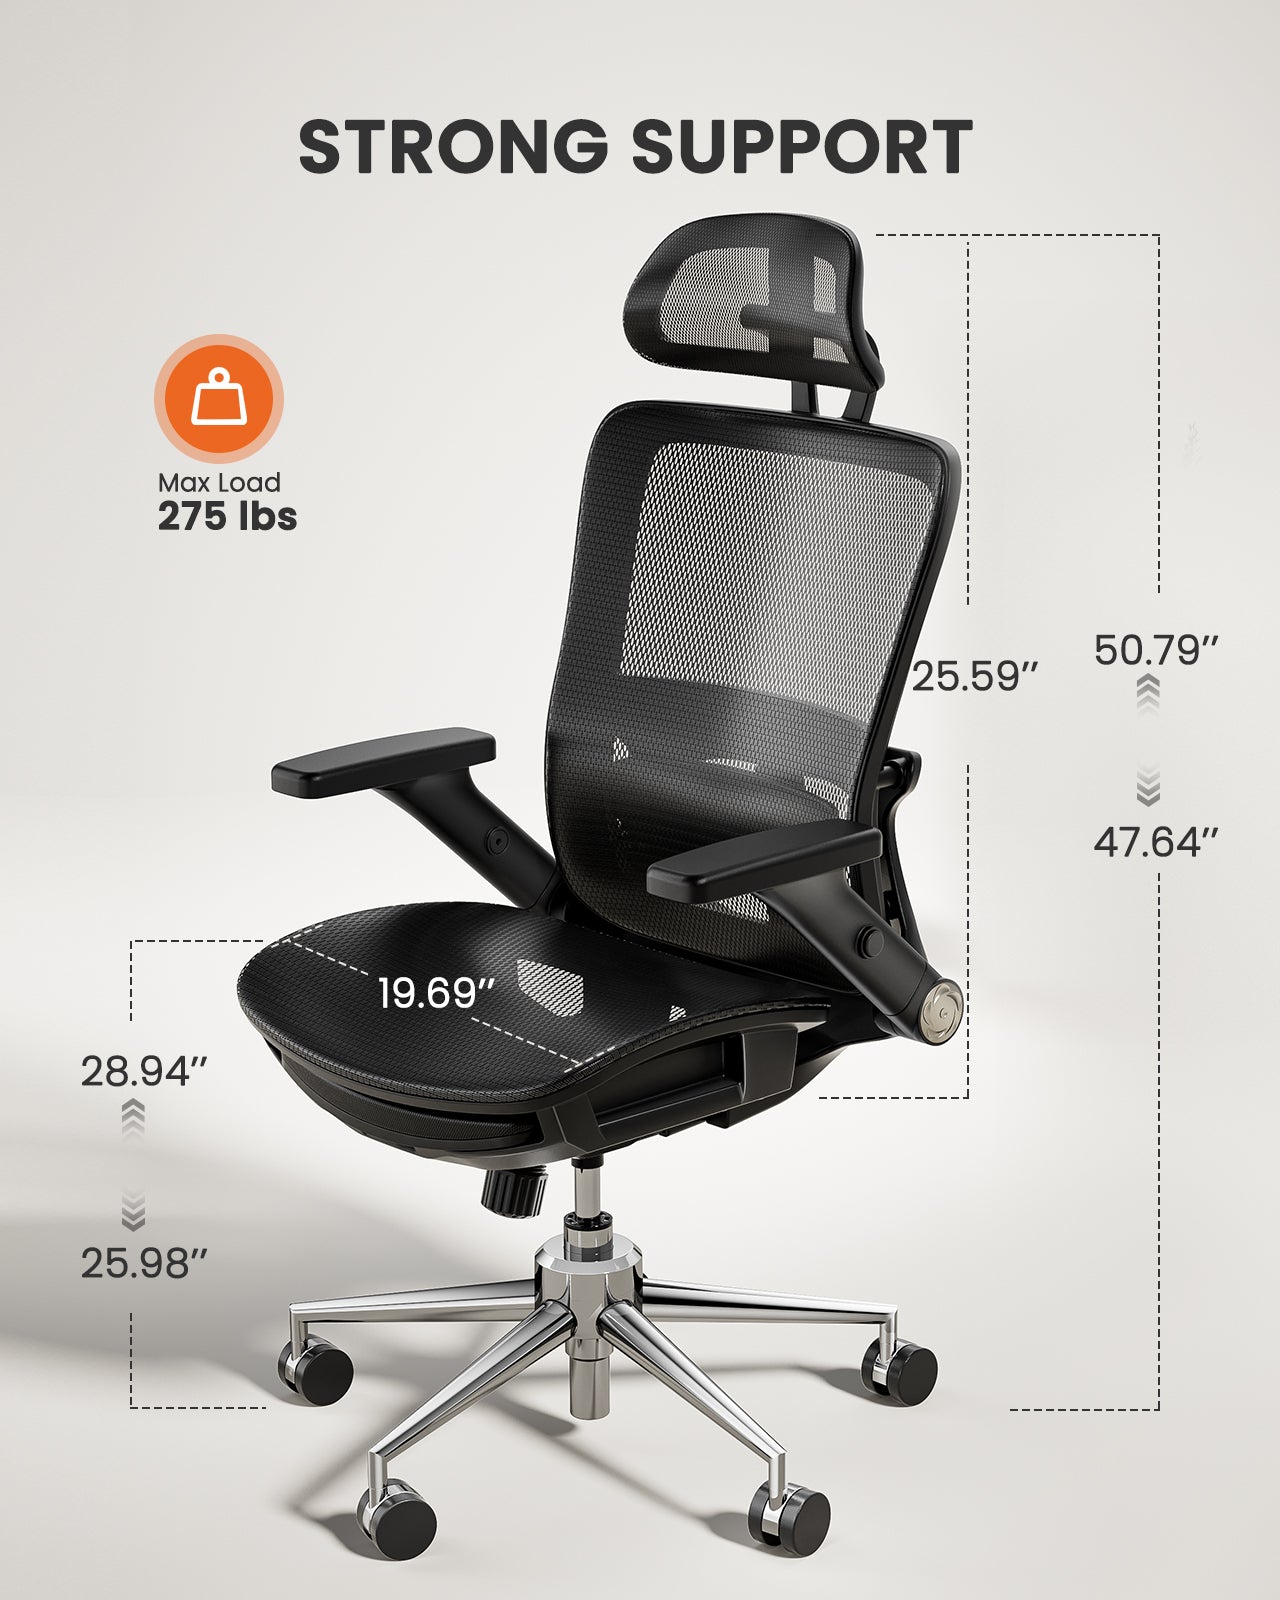 Ergonomic Office Chair With Foot Rest, Lumbar Support With Flip-Up